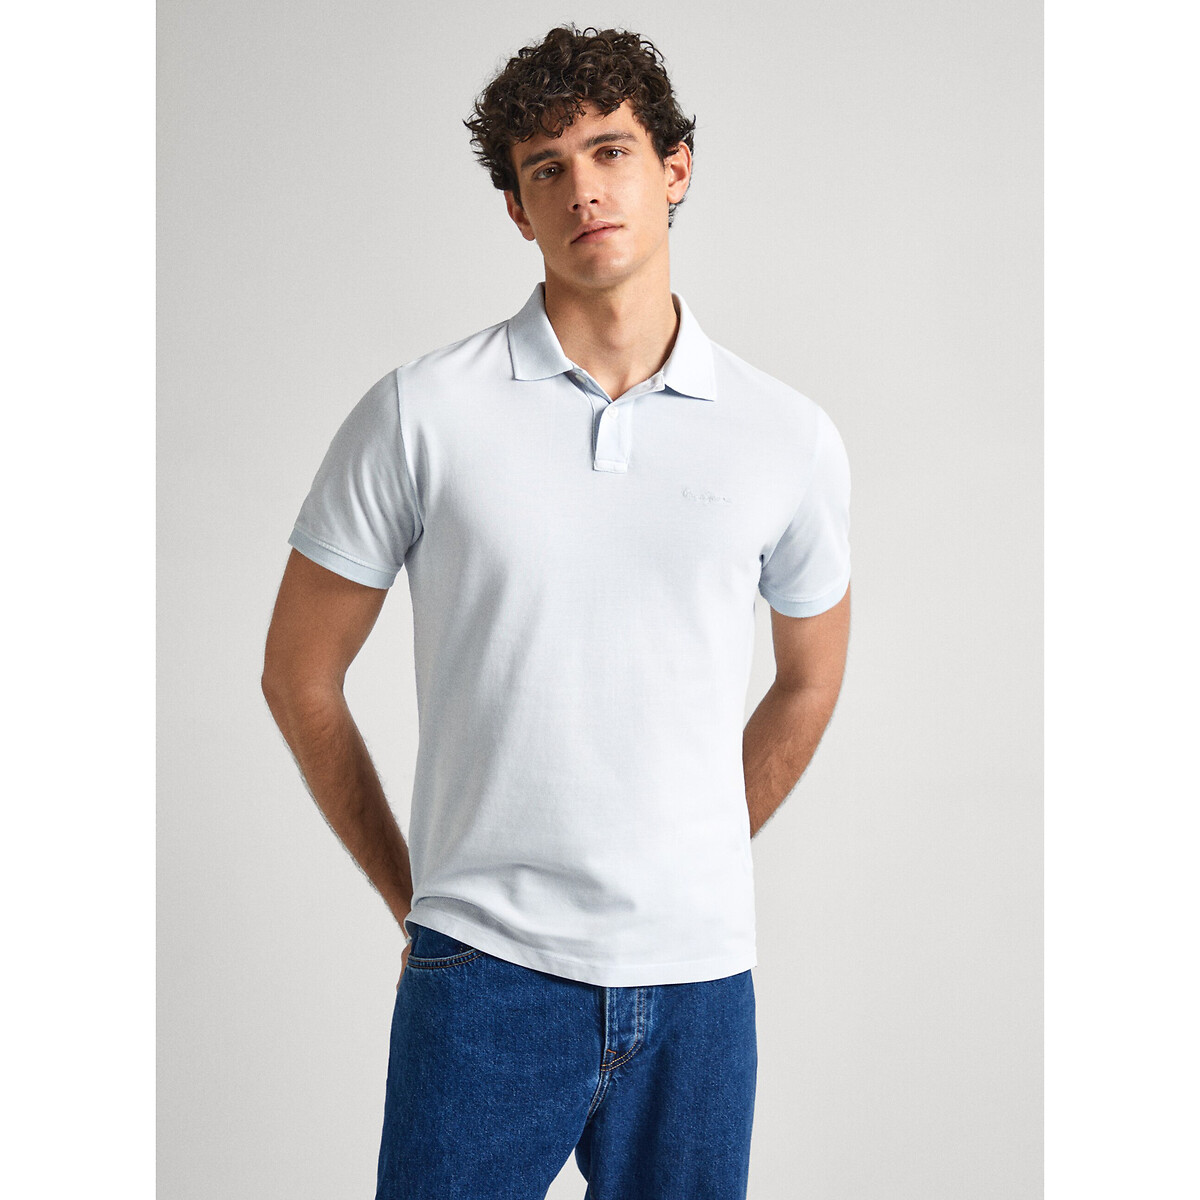 Image of Embroidered Logo Polo Shirt in Cotton Pique with Short Sleeves